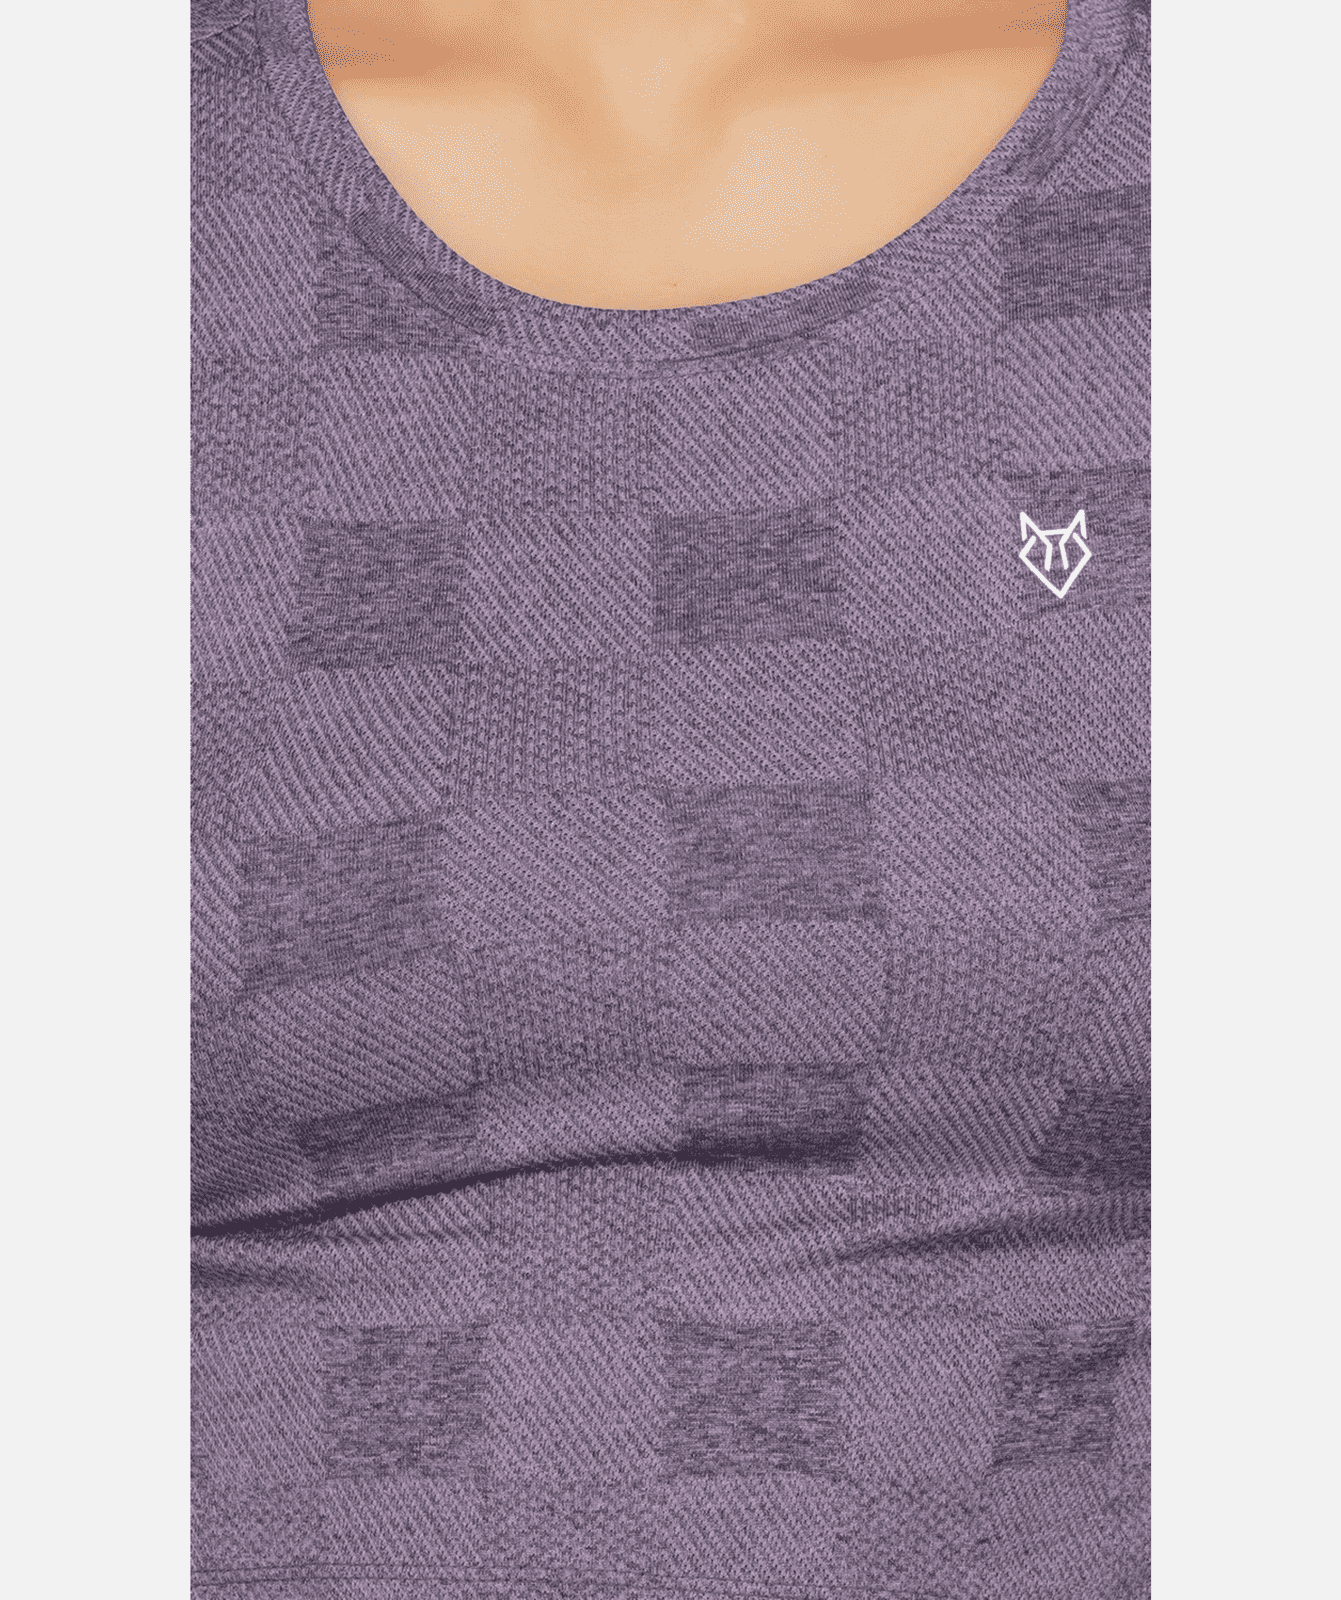 Soft Mesh Cut top | Breathable | Baby Tone Women's Upper